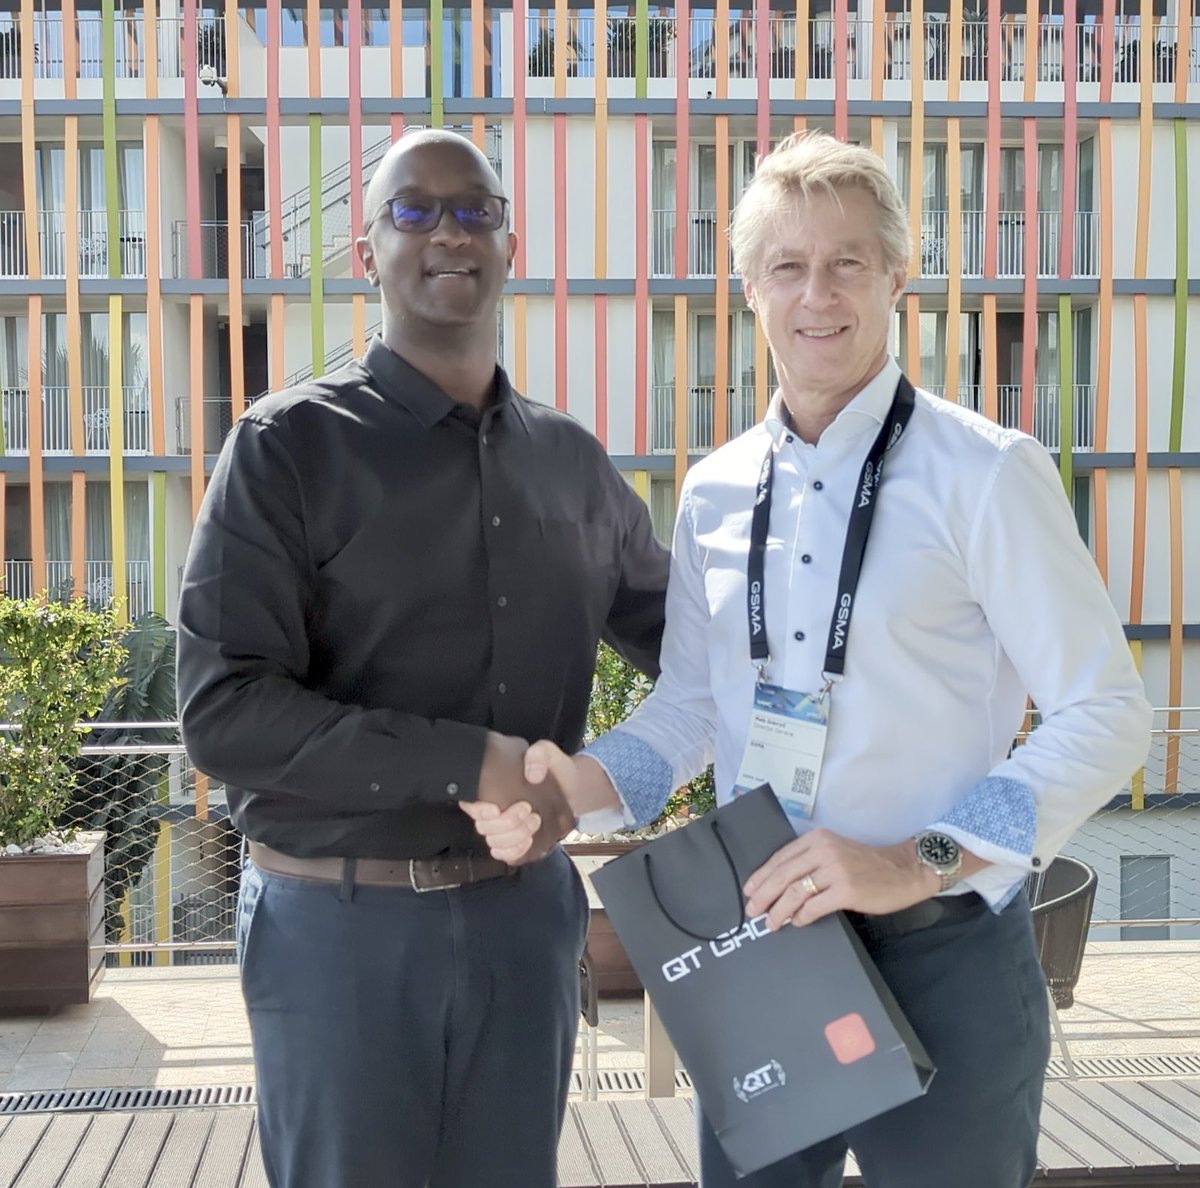 On the sidelines of the Mobile World Congress, our CEO @RwandaRob connected with @MatsGranryd Director of GSMA!
We look forward to the future partnerships from the three-day conference here in Kigali! 🌟
#MWCKigali @MWCHub 
🇷🇼➡️🌎